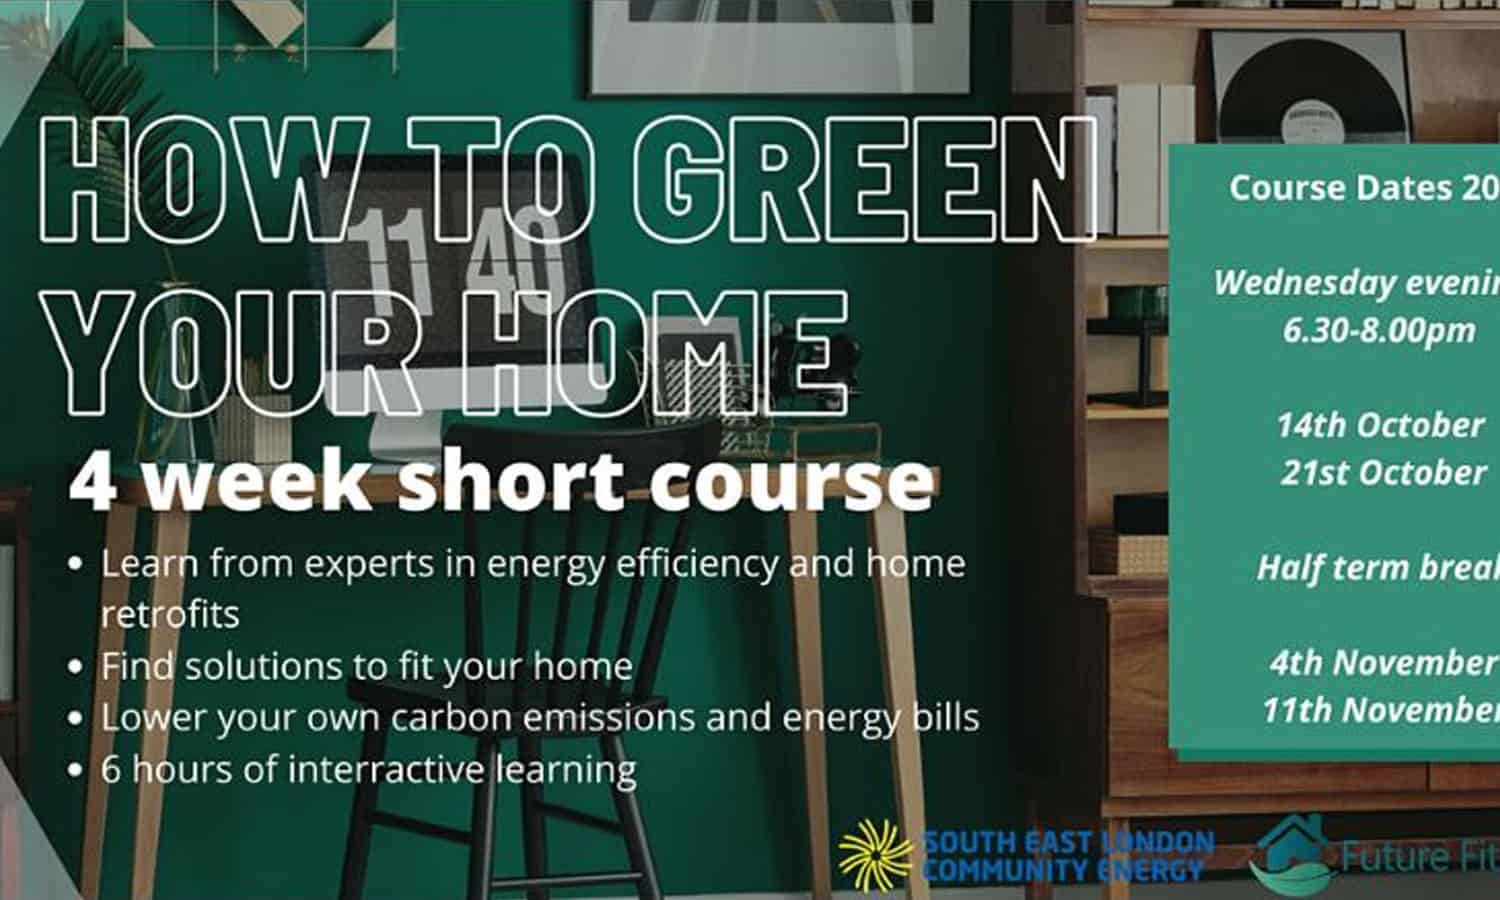 SELCE - Online Short Course - James is a Certified Passivhaus Designer with over 15 years’ experience in low-energy design author of ‘EnerPHit – A Step by Step Guide to Low-Energy Retrofit’.